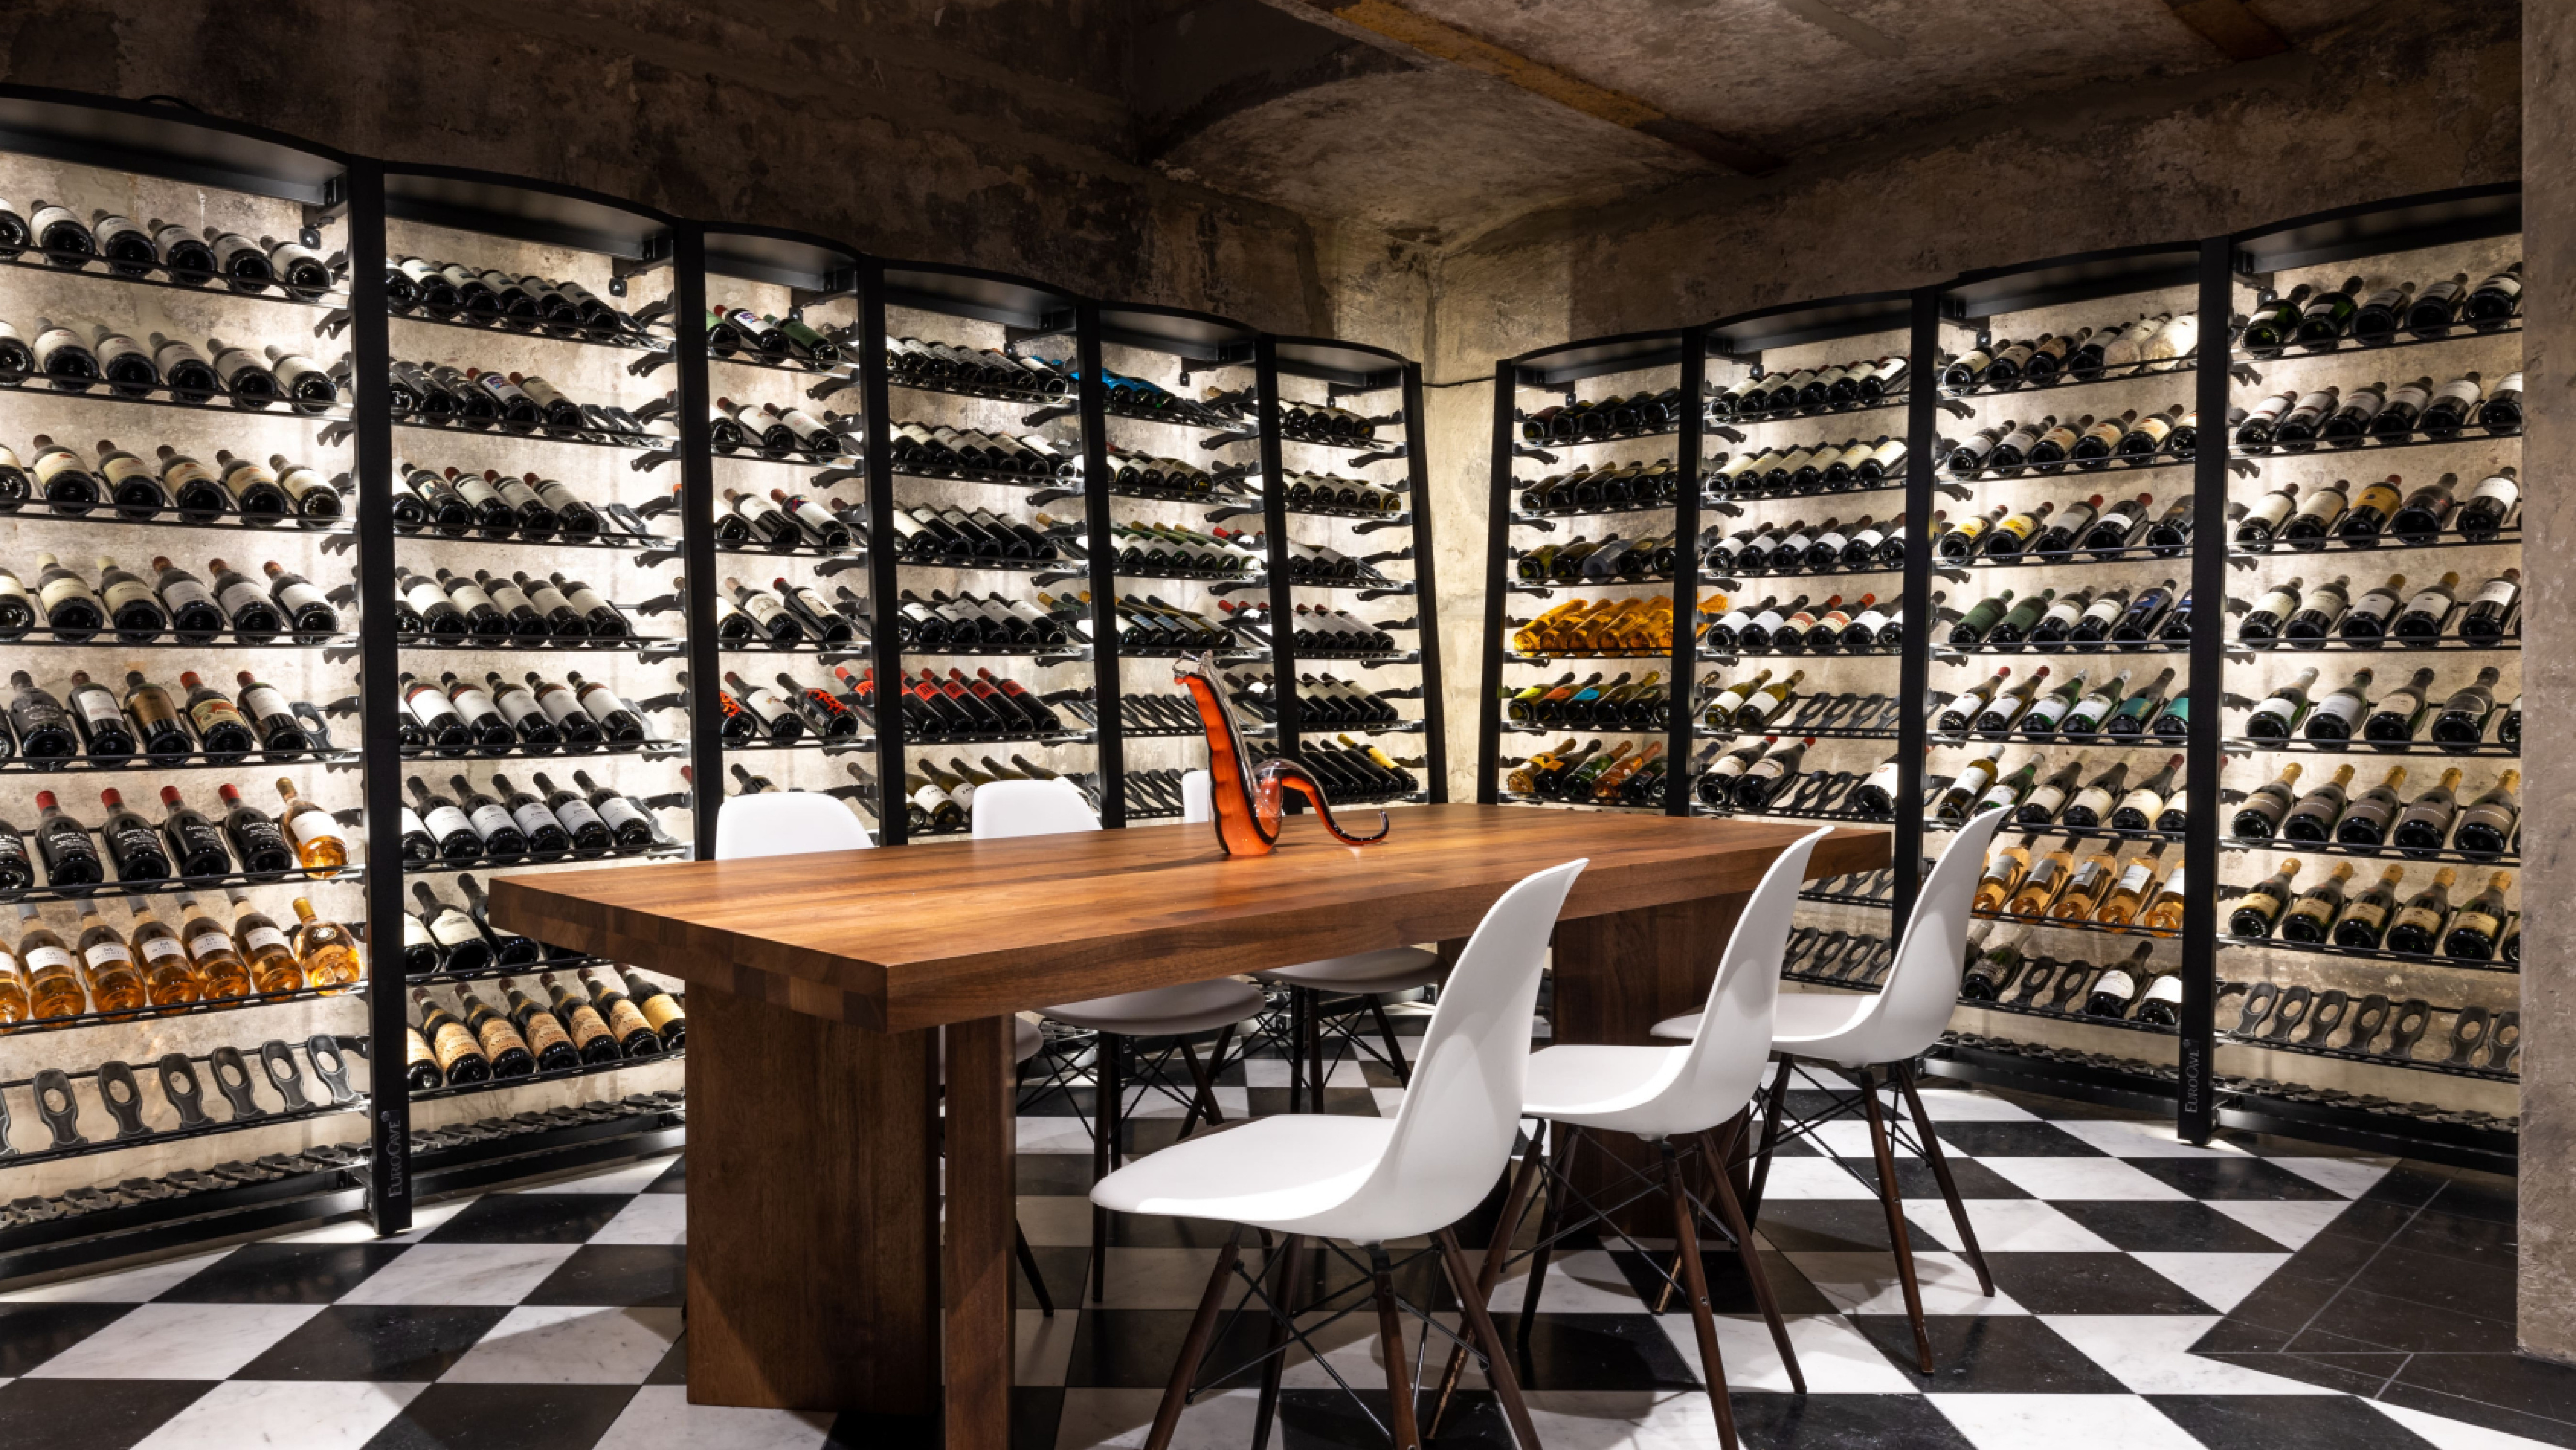 Ideas for creating a wine space: installation of EuroCave products in cellars or air-conditioned rooms. Find inspiration!